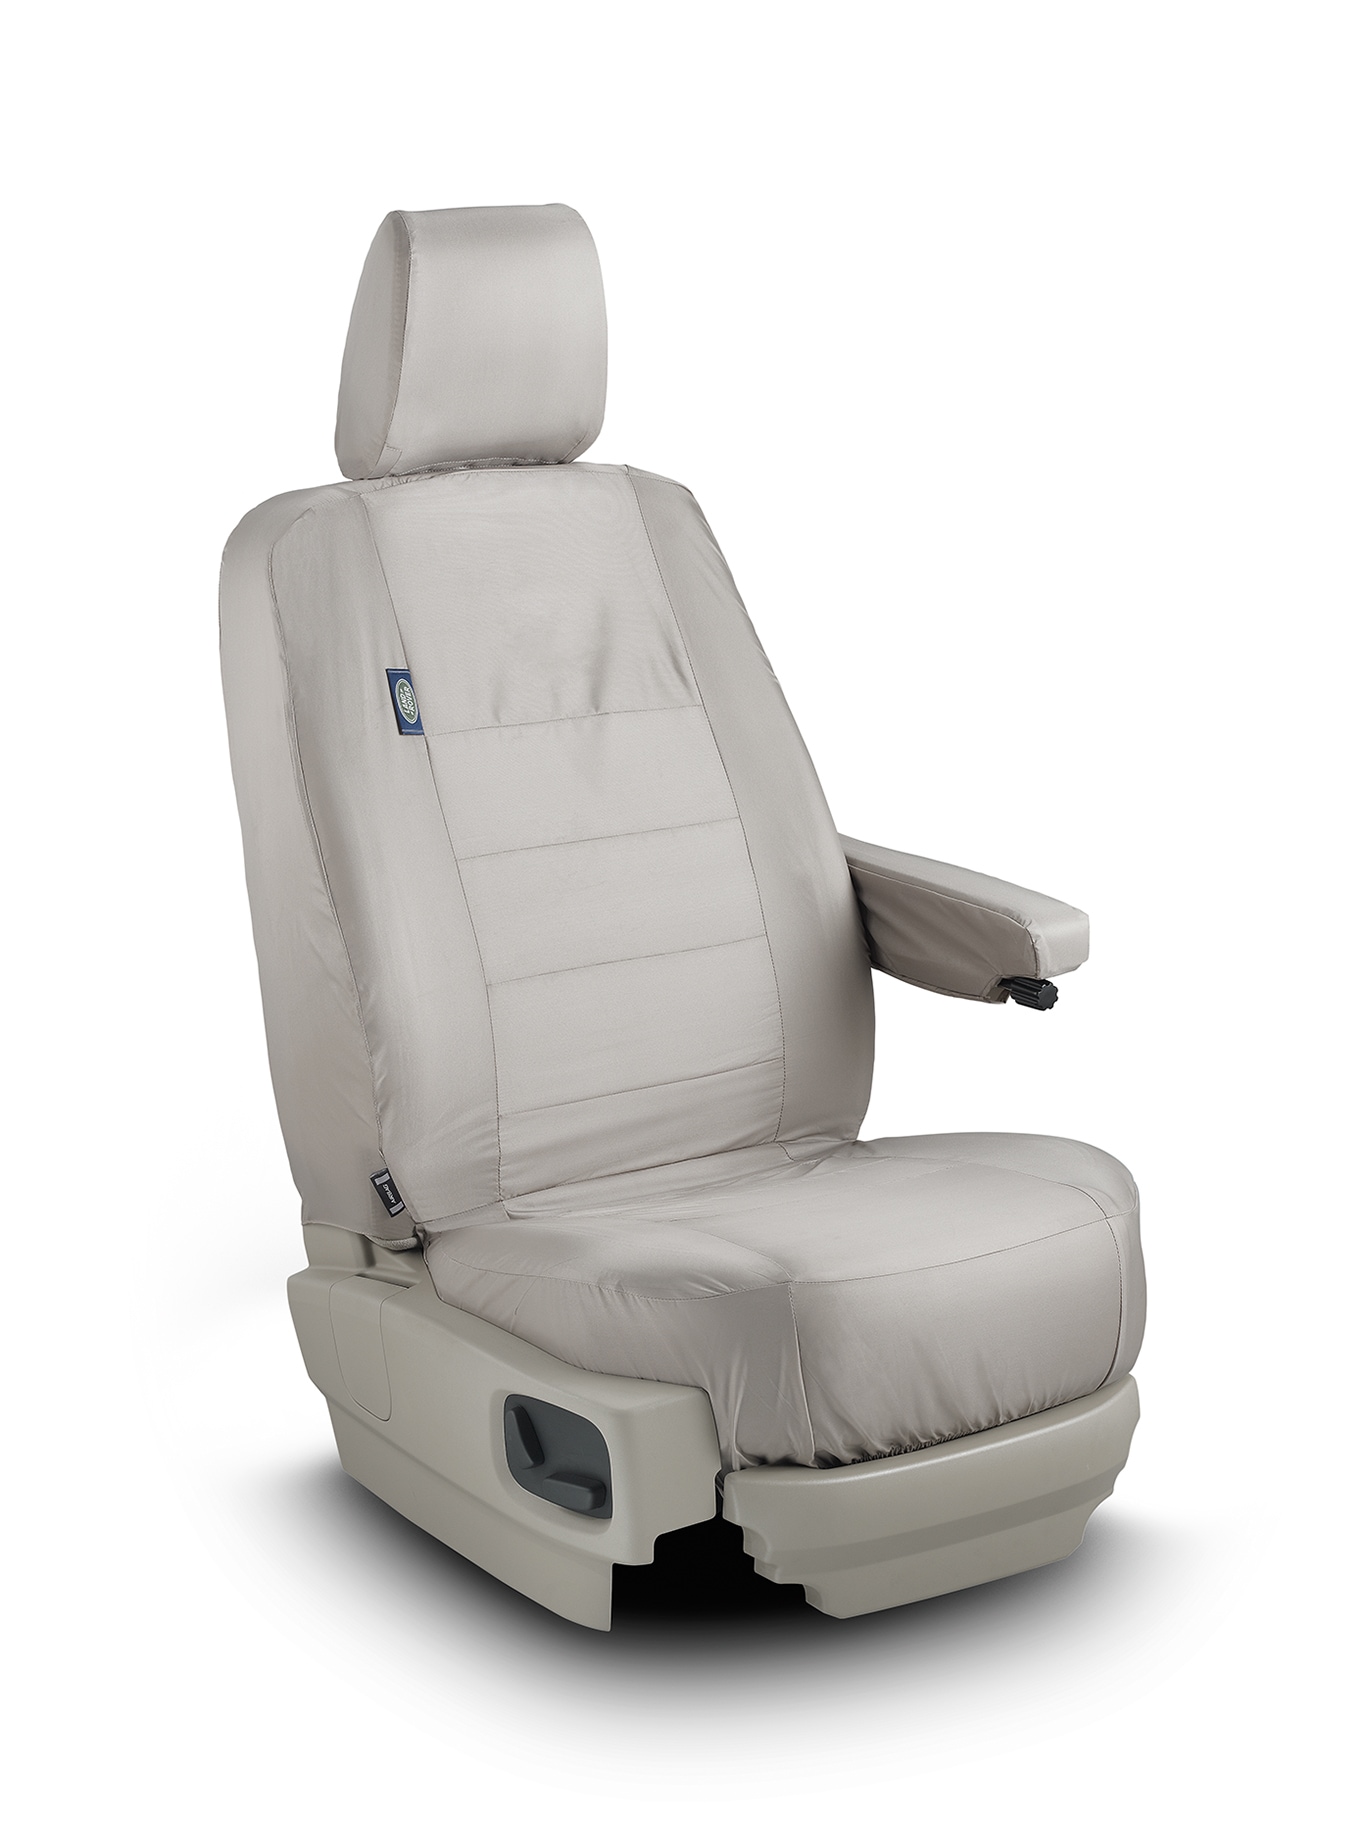 Waterproof Seat Covers - Almond, Front Seat, Non DVD